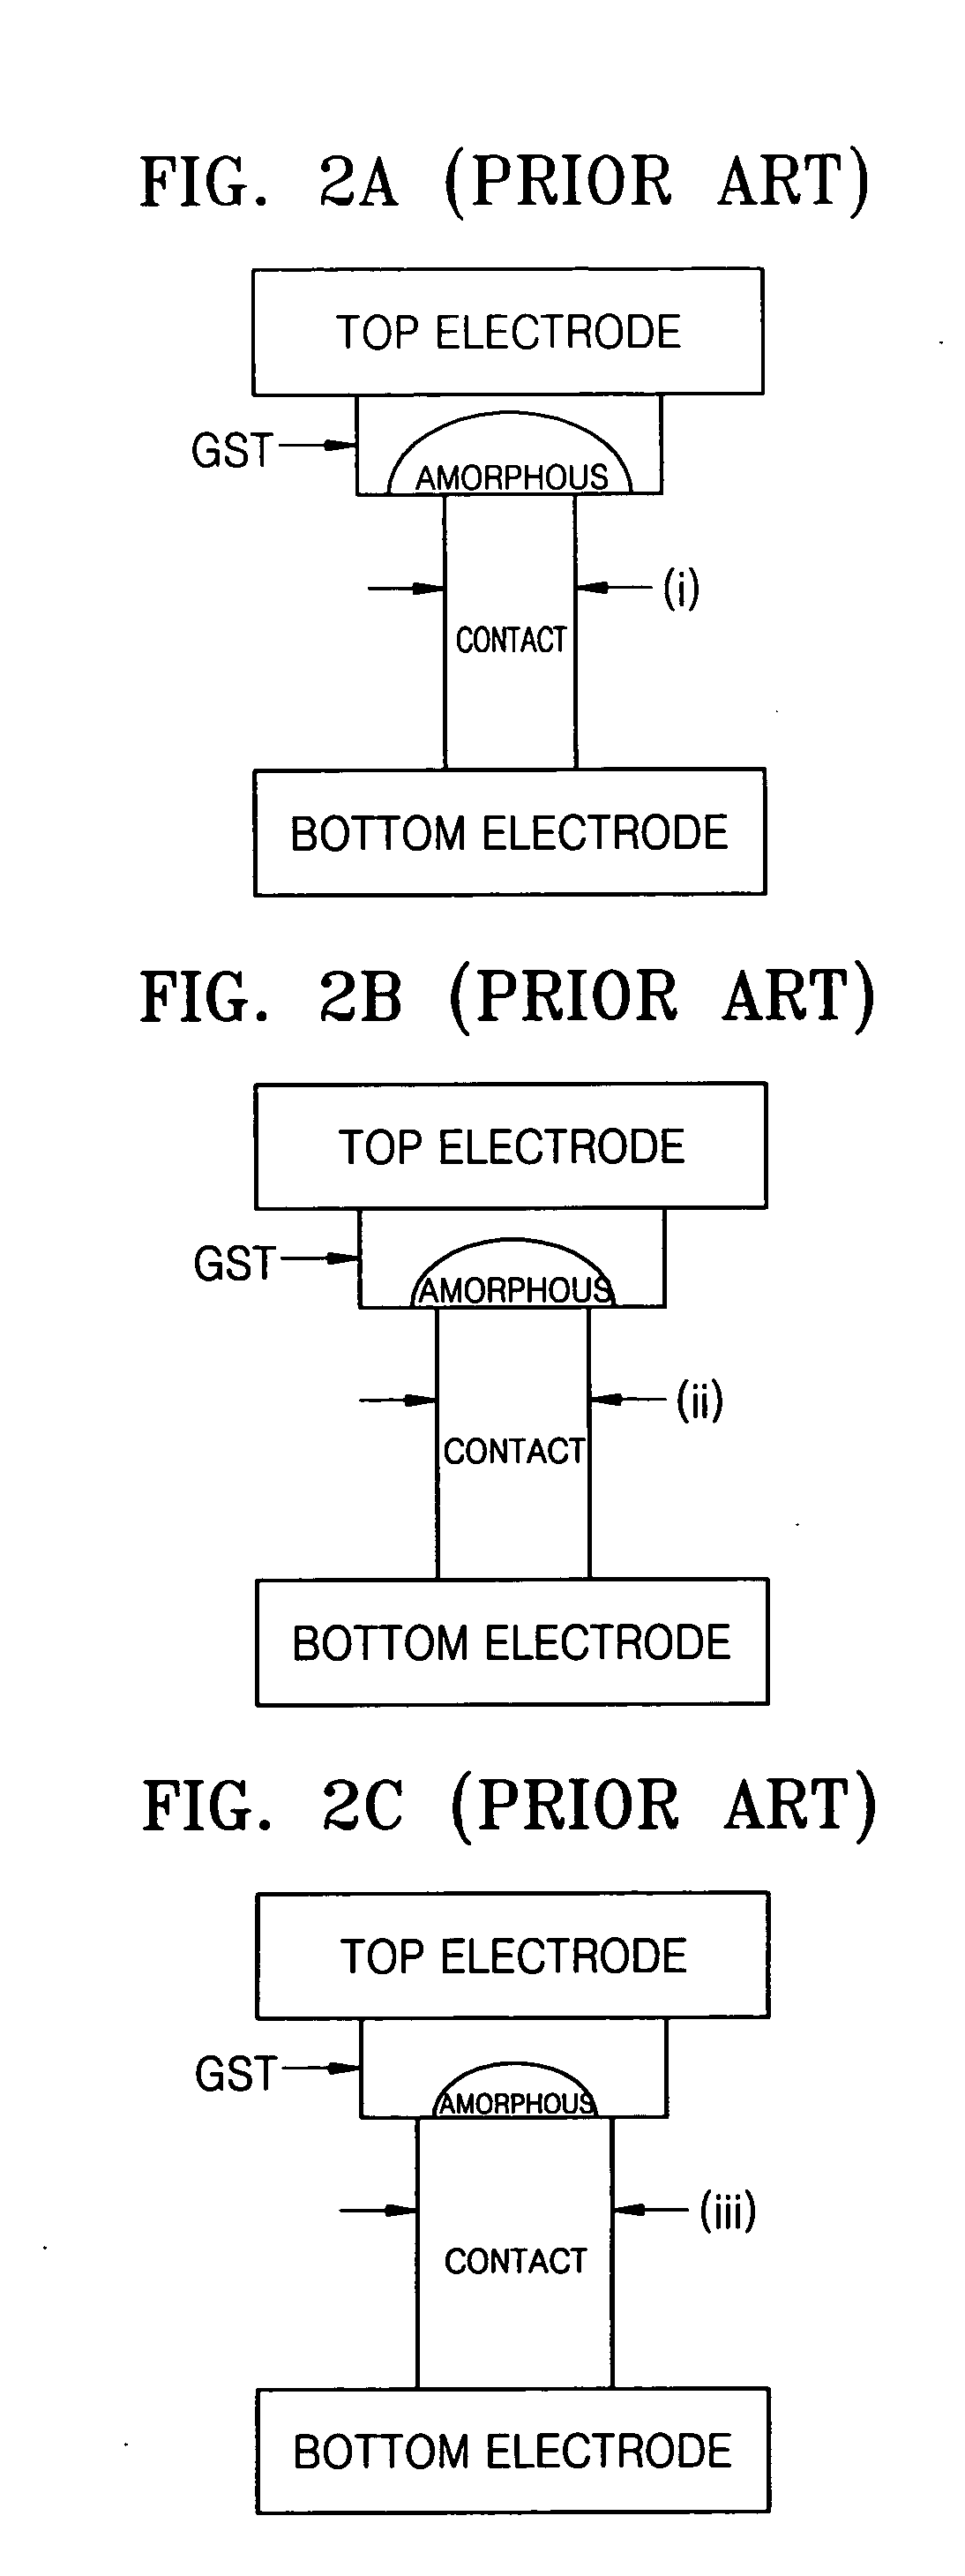 Phase-change memory device and method that maintains the resistance of a phase-change material in a reset state within a constant resistance range